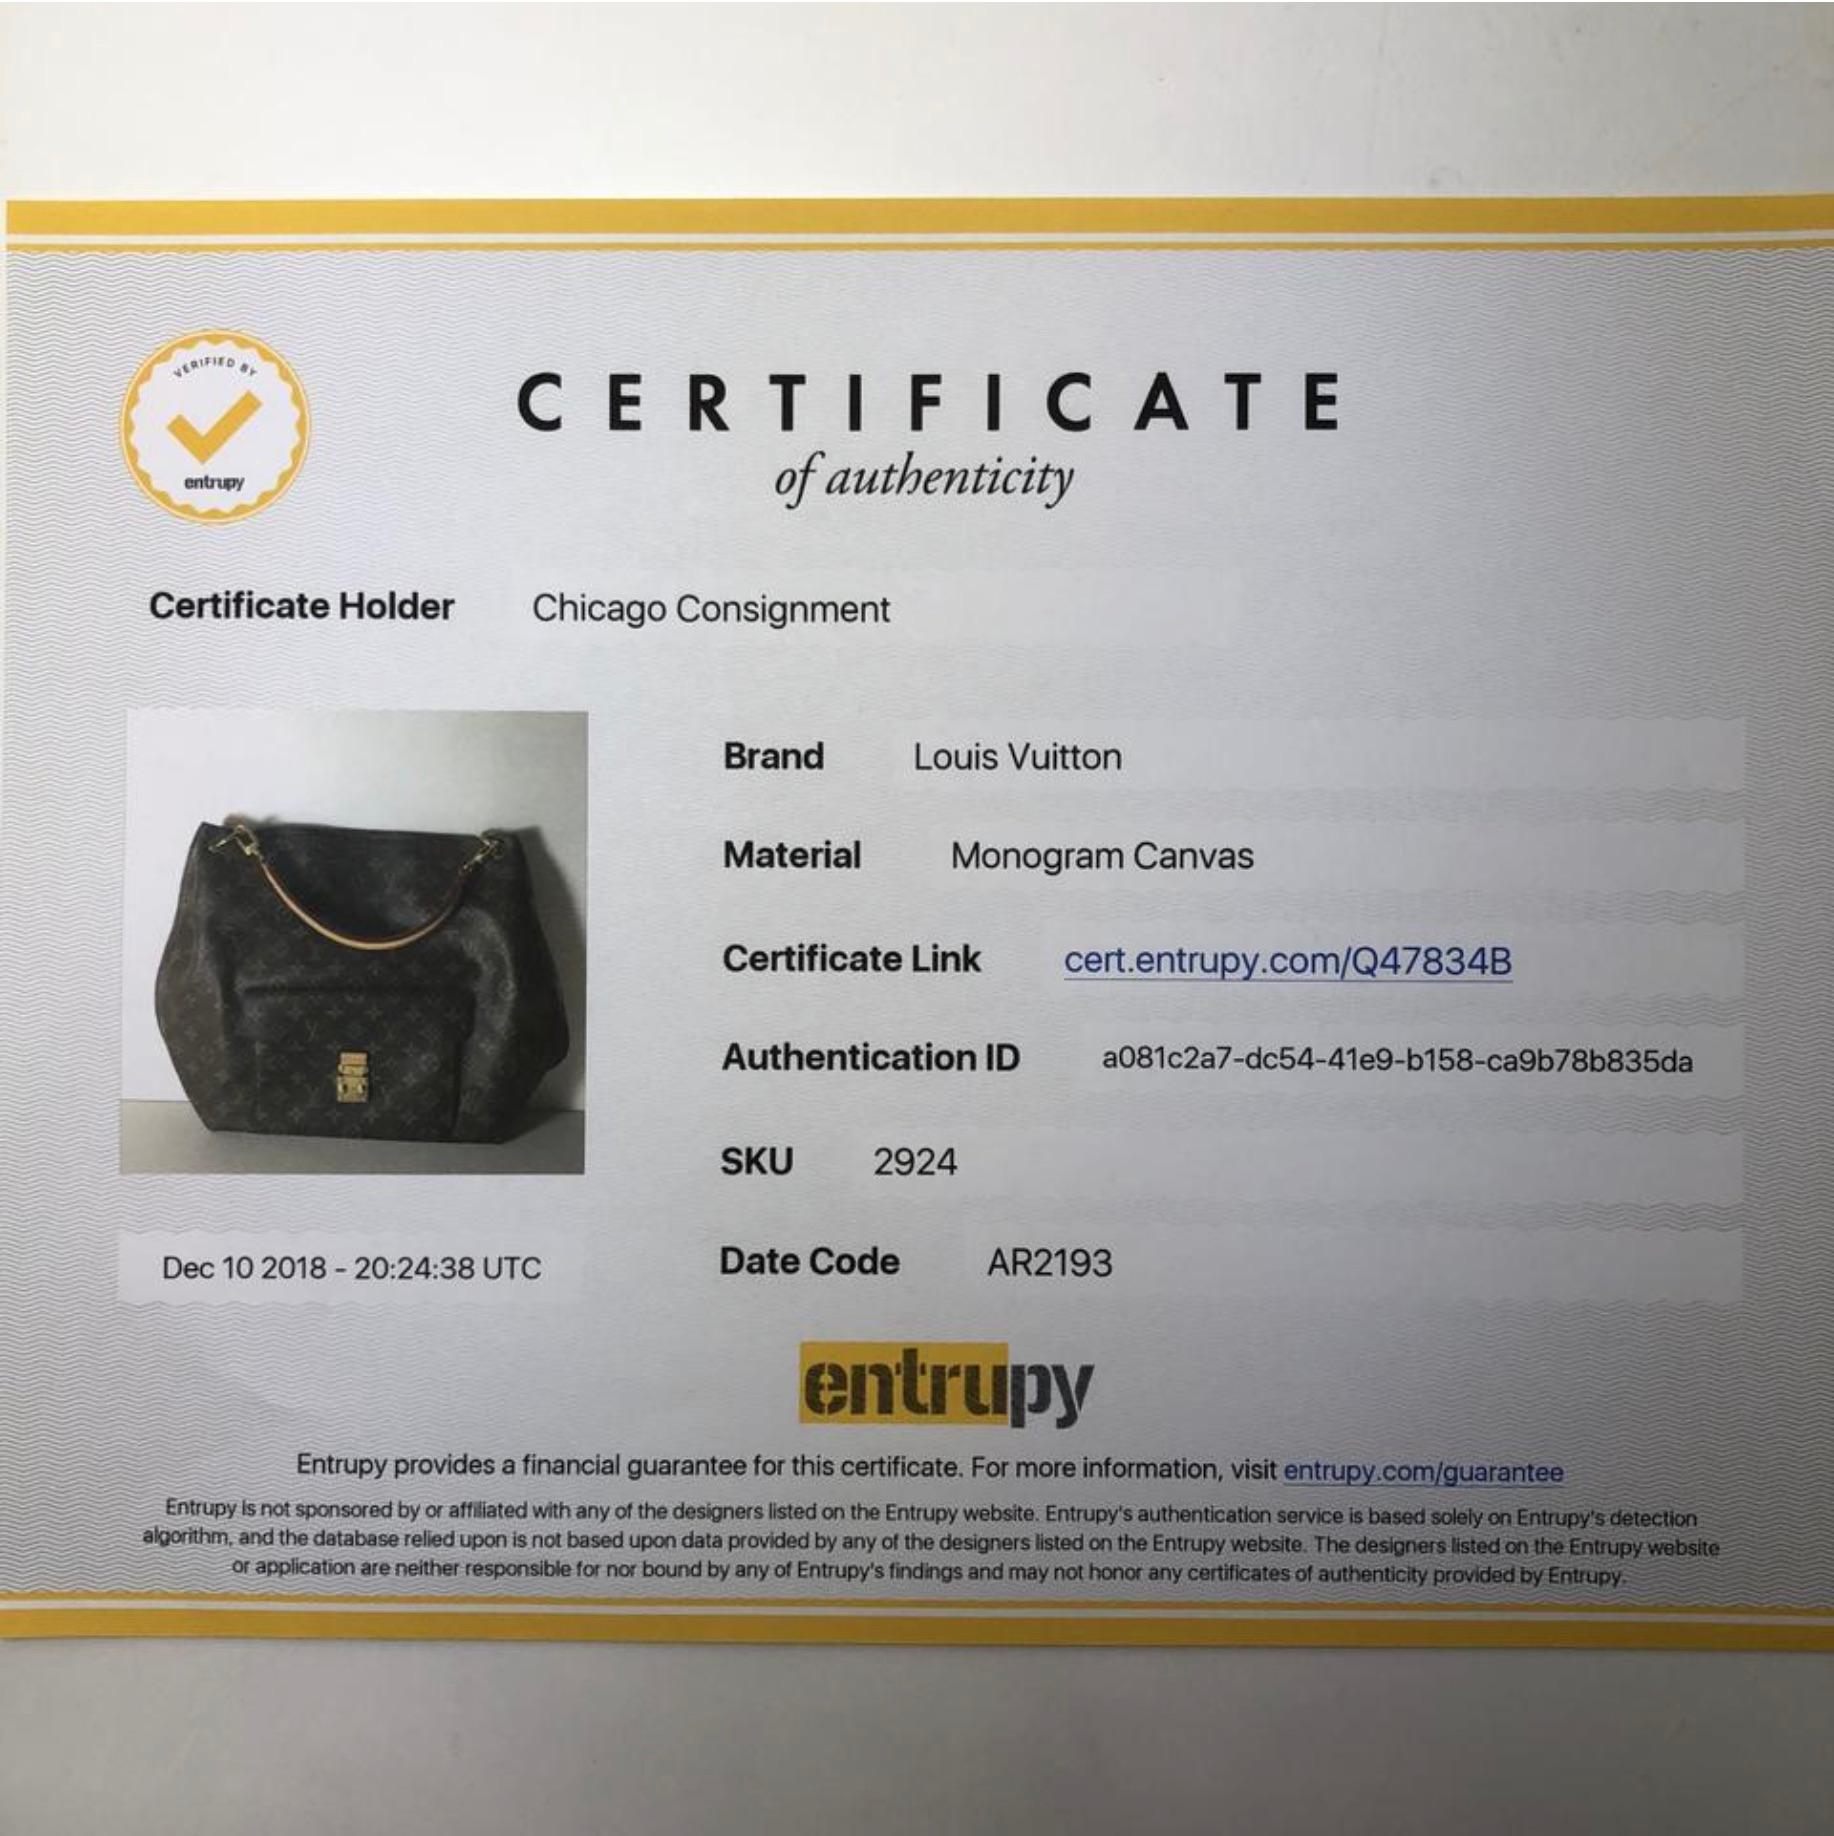 MODEL - Louis Vuitton Monogram Metis Hobo Two Way Shoulder Handbag

CONDITION - Exceptional! Light vachette, light watermarks, no handle darkening, no dryness. Bright and shiny hardware with no tarnishing. No rips, holes, tears, stains or odors.